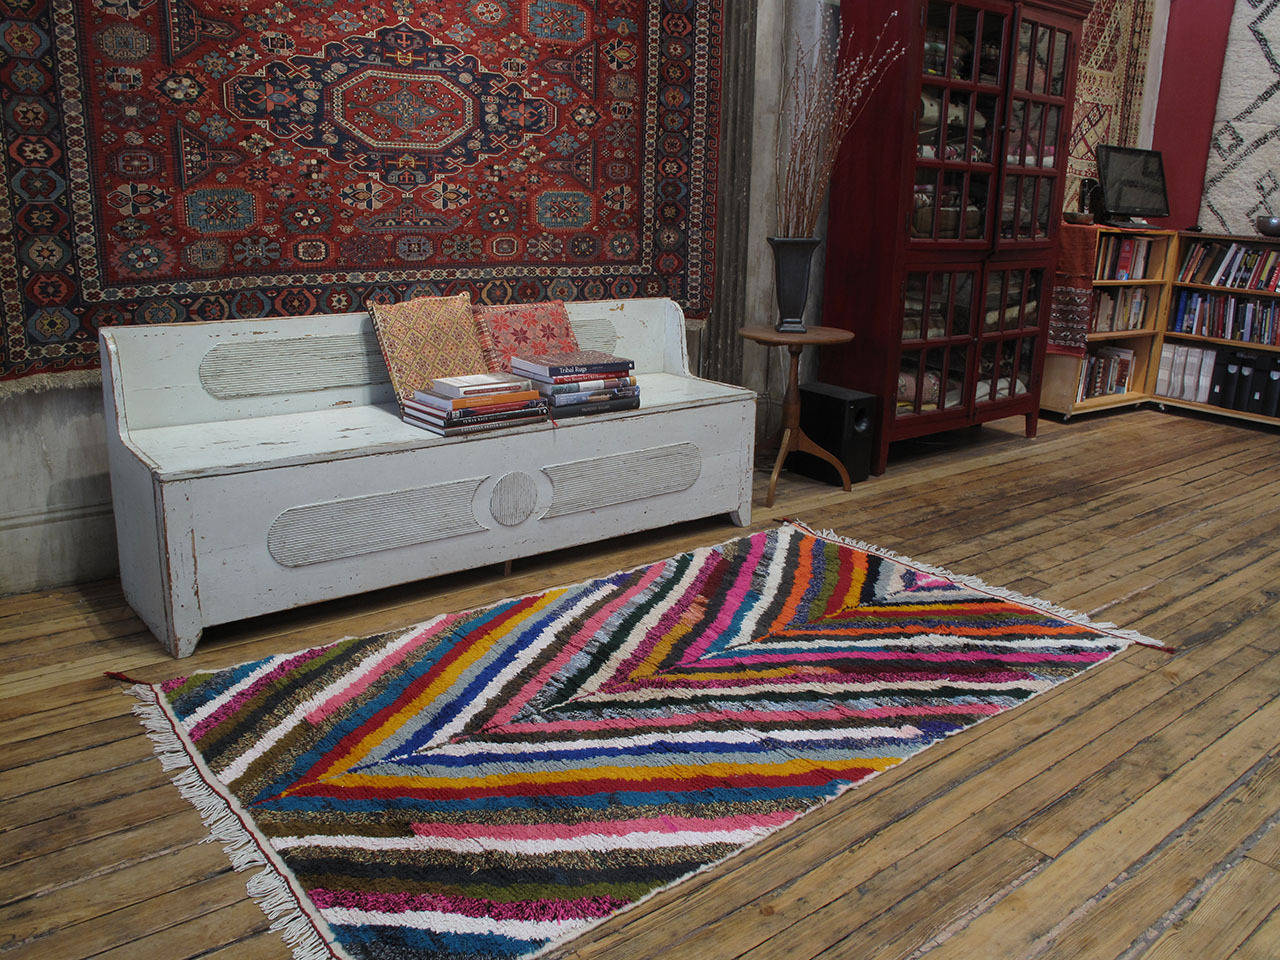 A dazzling color palette and crisply drawn design make this Moroccan rug from the high Atlas mountains stand out. Berber women still weave in this region to decorate their own homes, not just for the market, with pride and creativity that has long